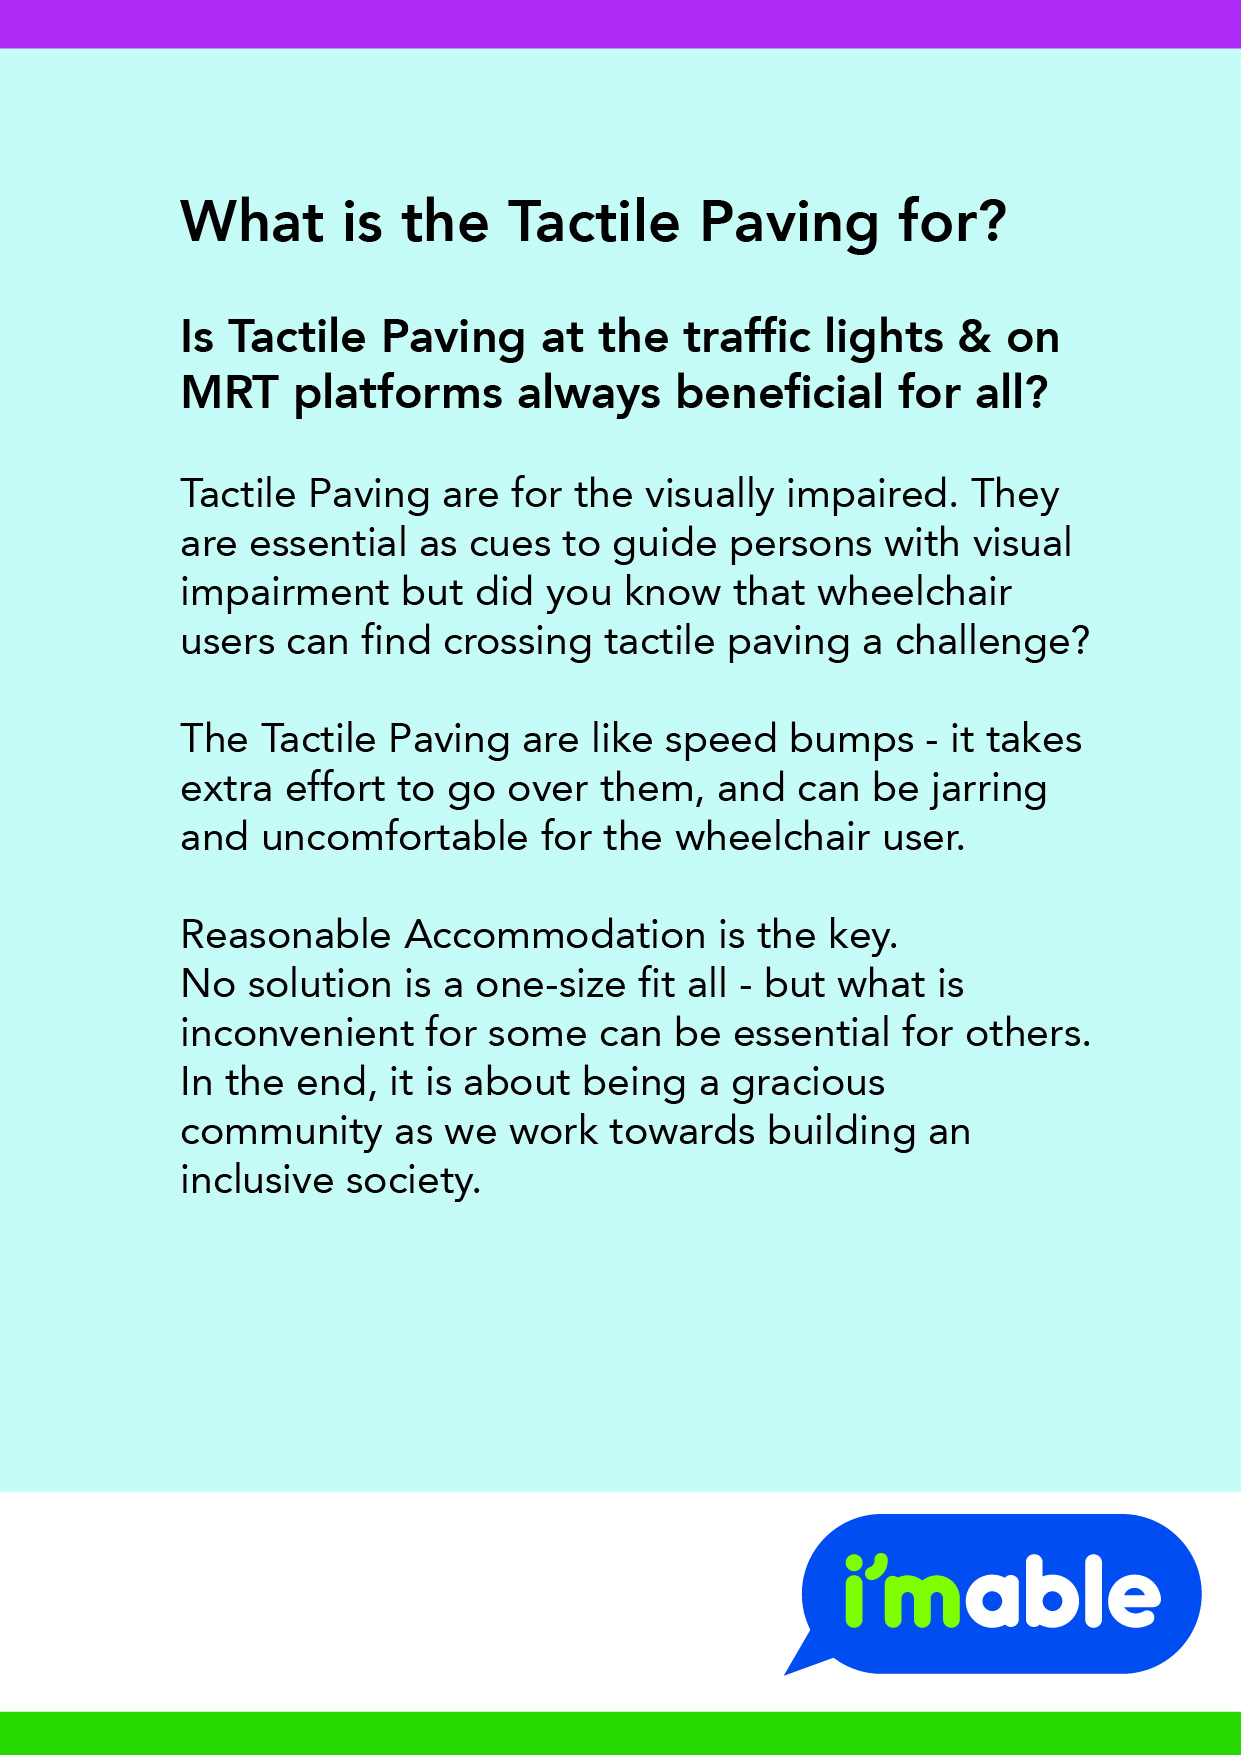 Explanation of what tactile paving is for